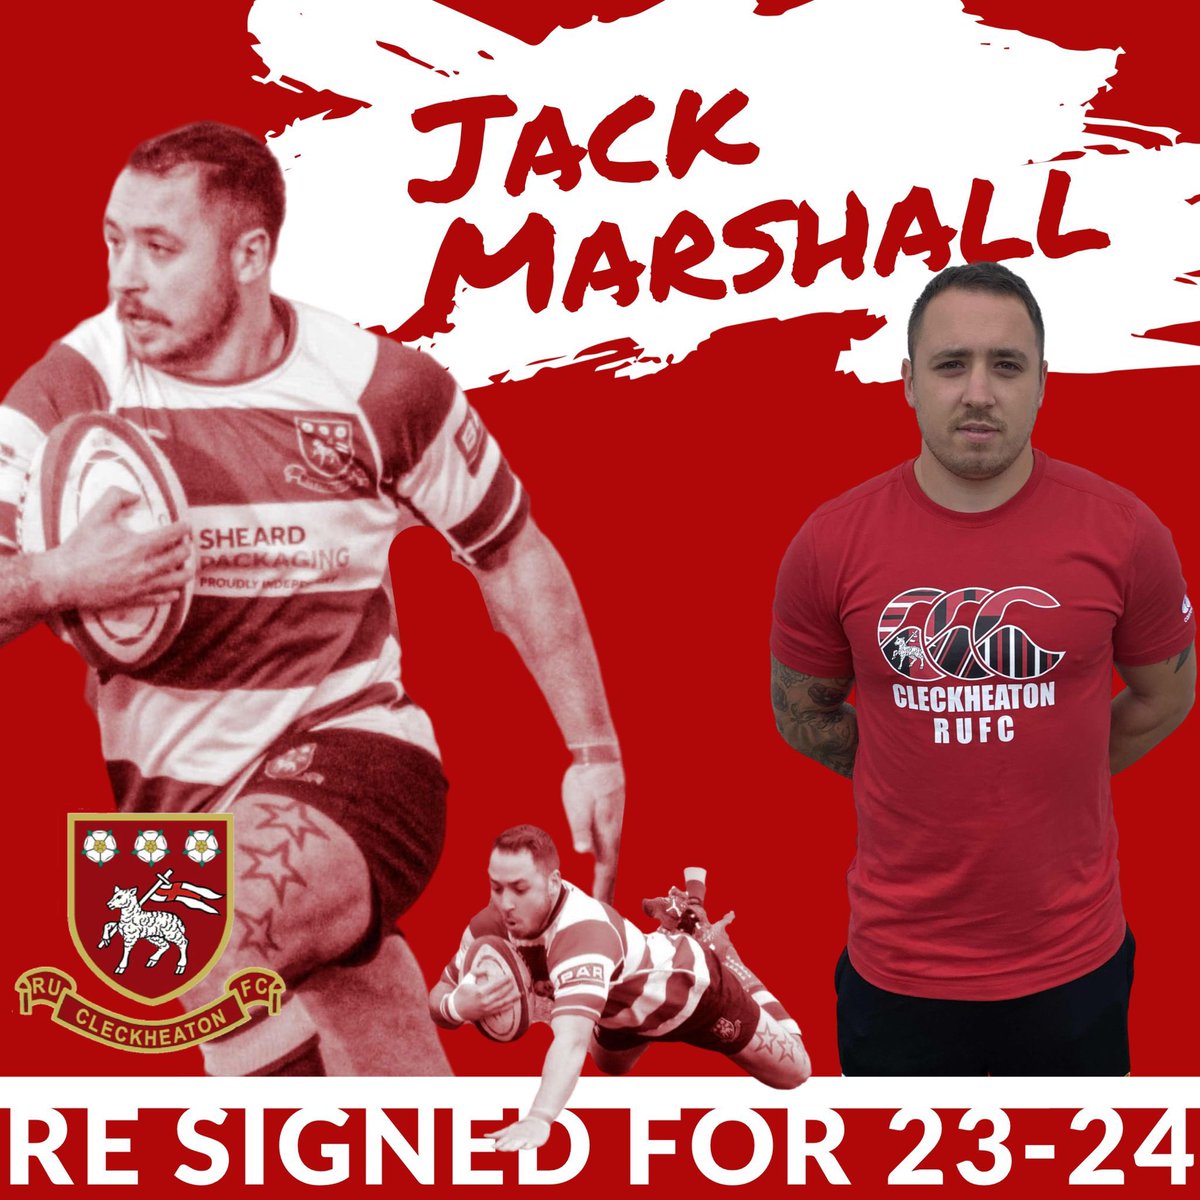 Last seasons top try scorer @jackrmarshall has re-signed for the 23/24 season. 

🐑
🔴⚪️🔴⚪️🔴